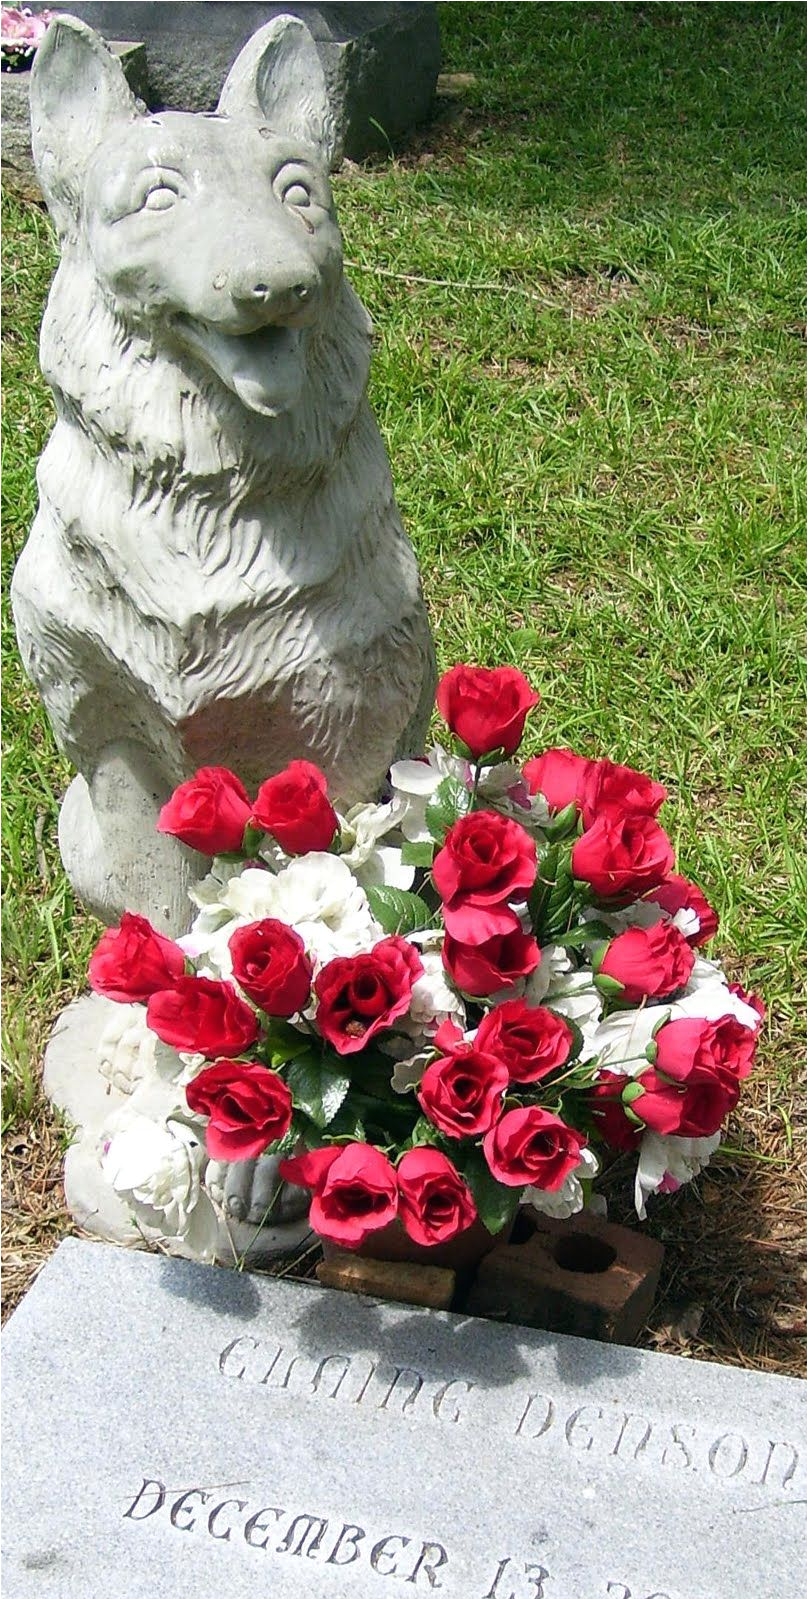 german shepherd statue at a tombstone photo from southern graves blog national pet week wordless wednesday 5 04 11